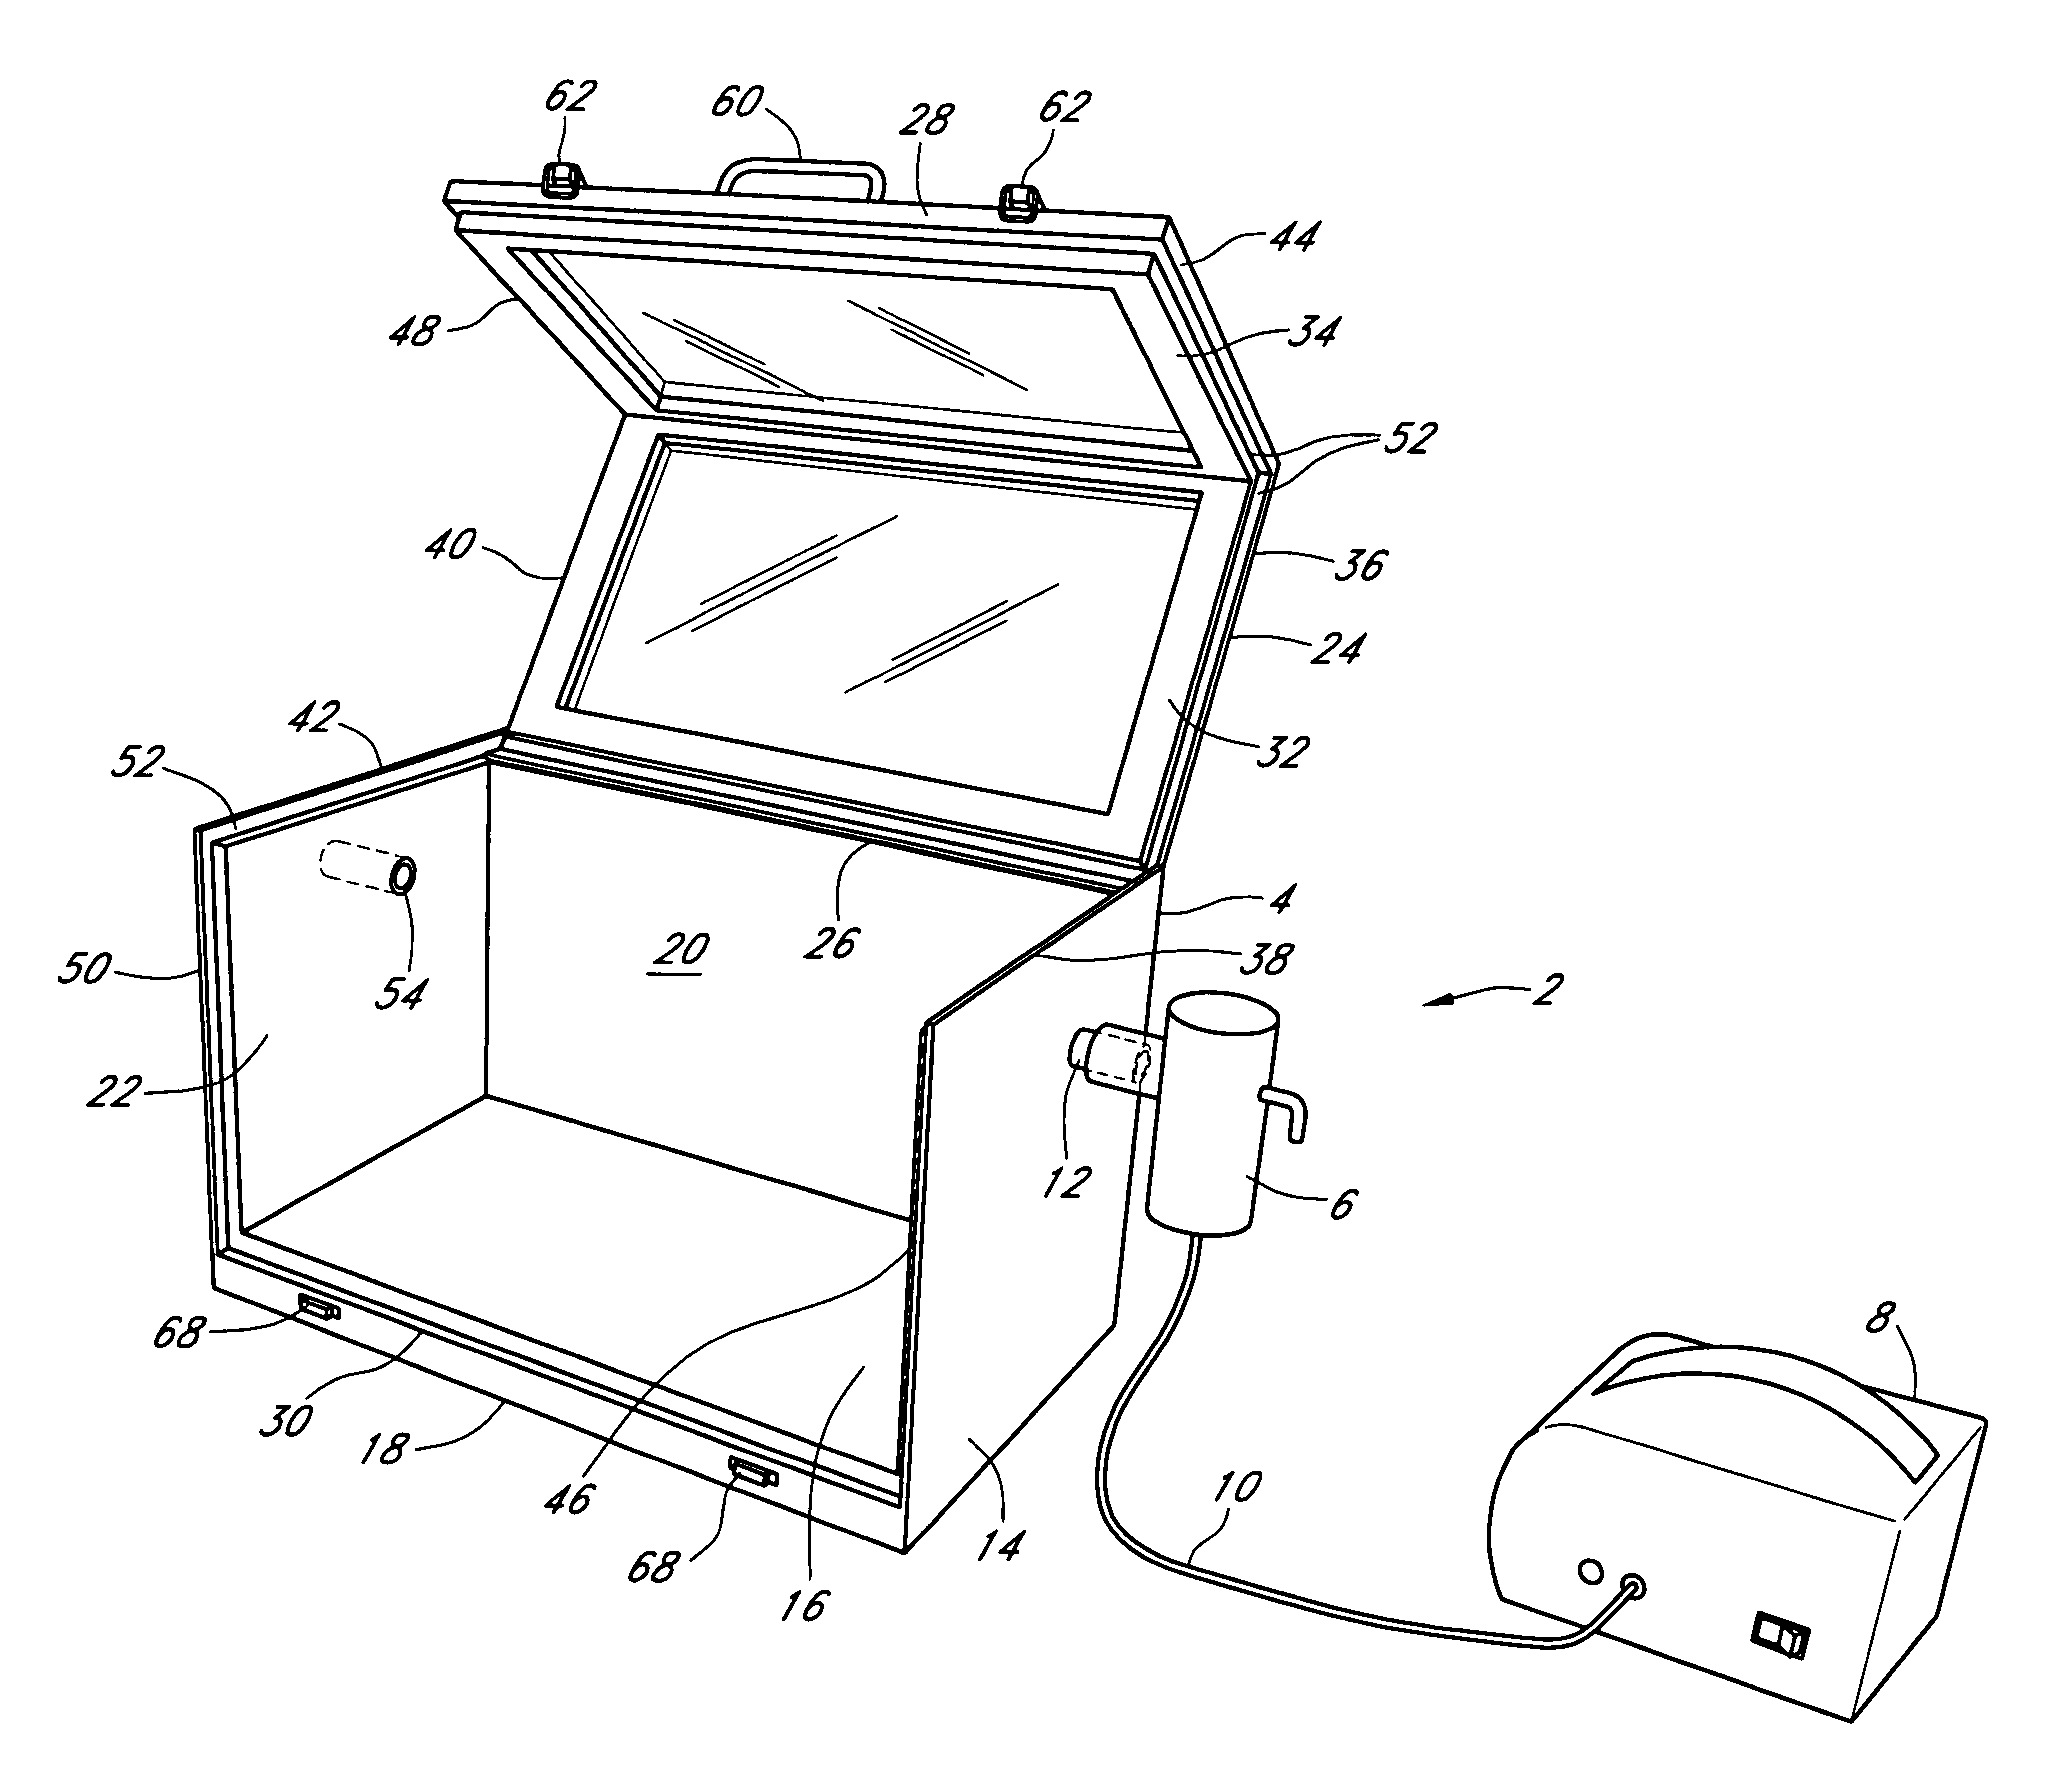 Inhalation therapy enclosure for small animals